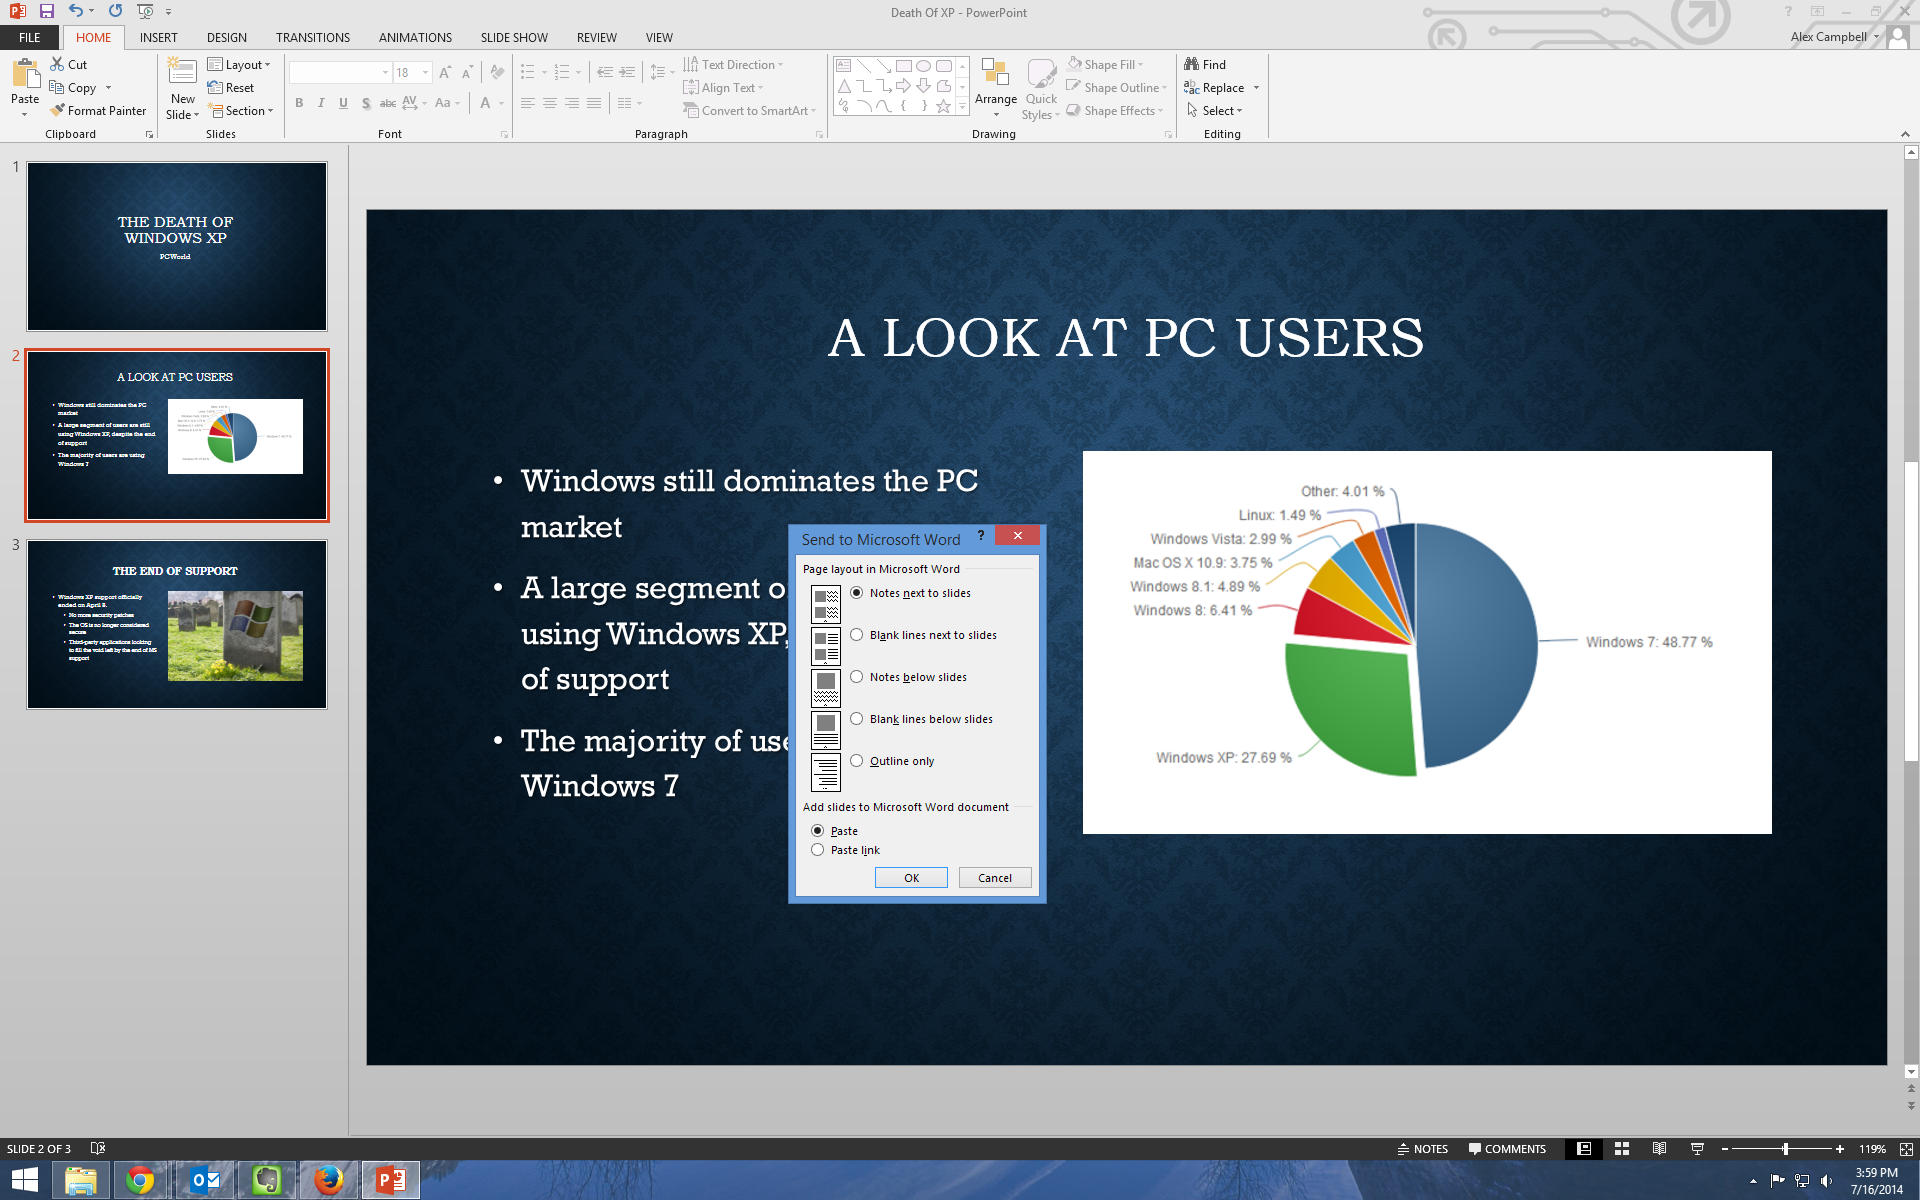 how to export presentation in powerpoint